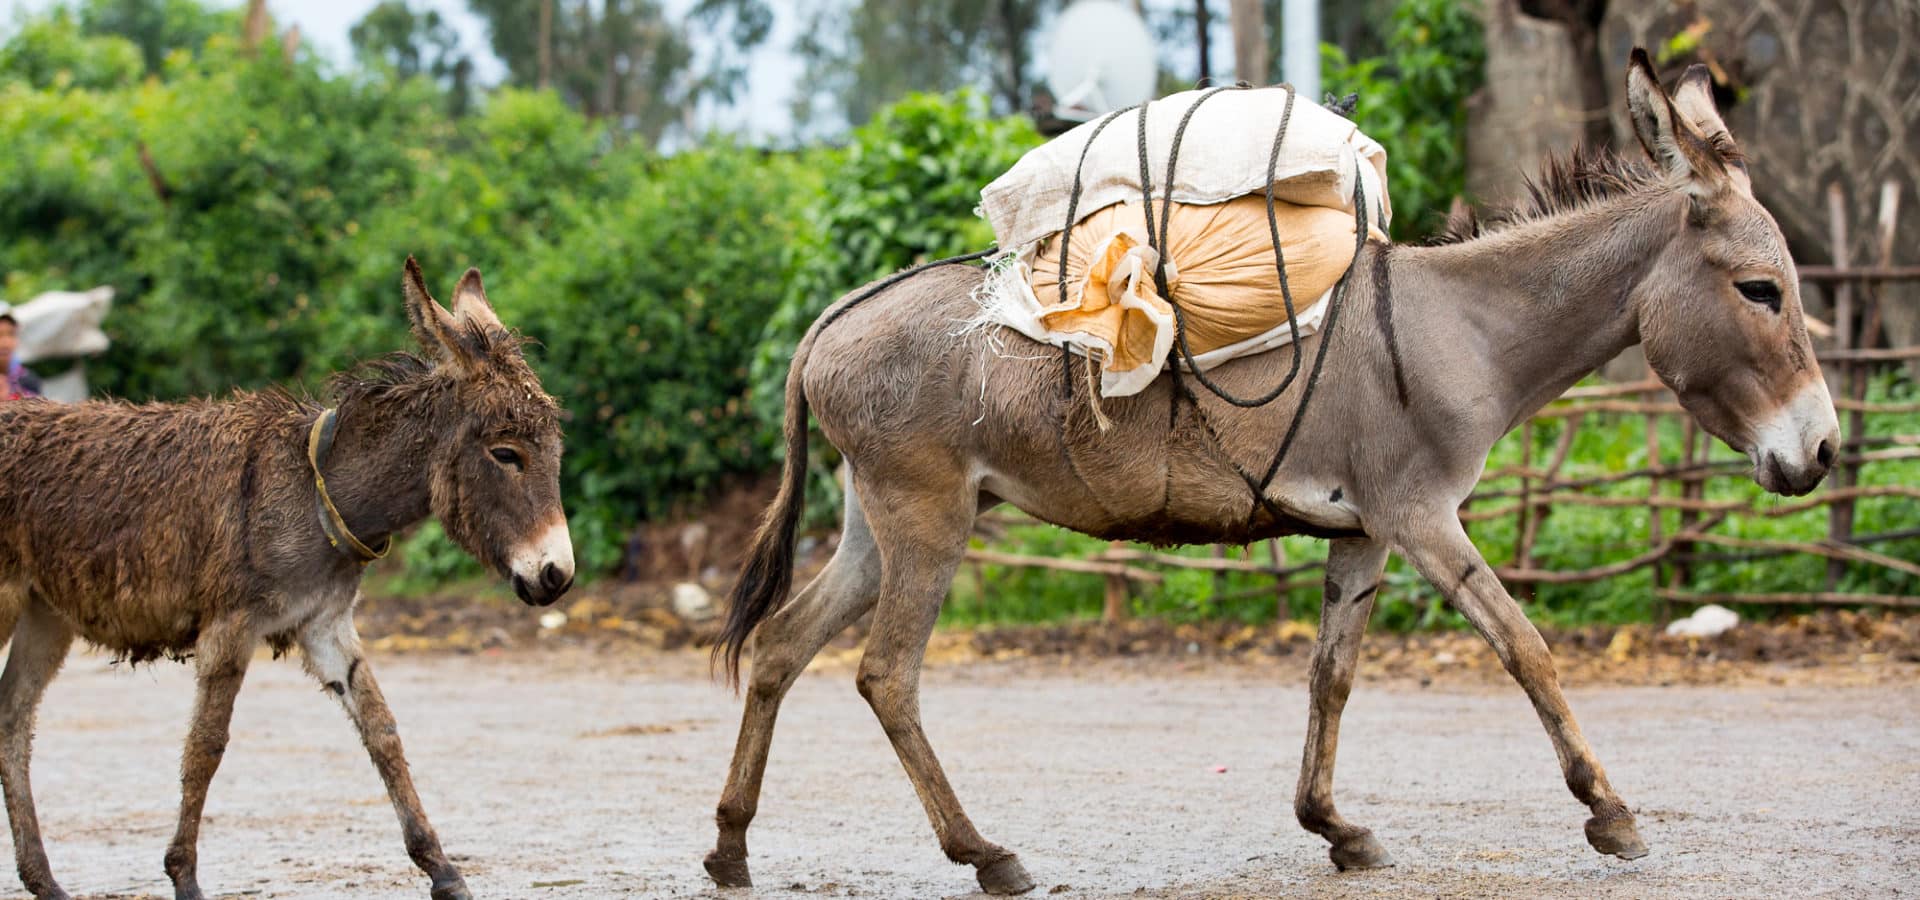 A grey donkey carrying a load on its back with a small brown donkey following behind